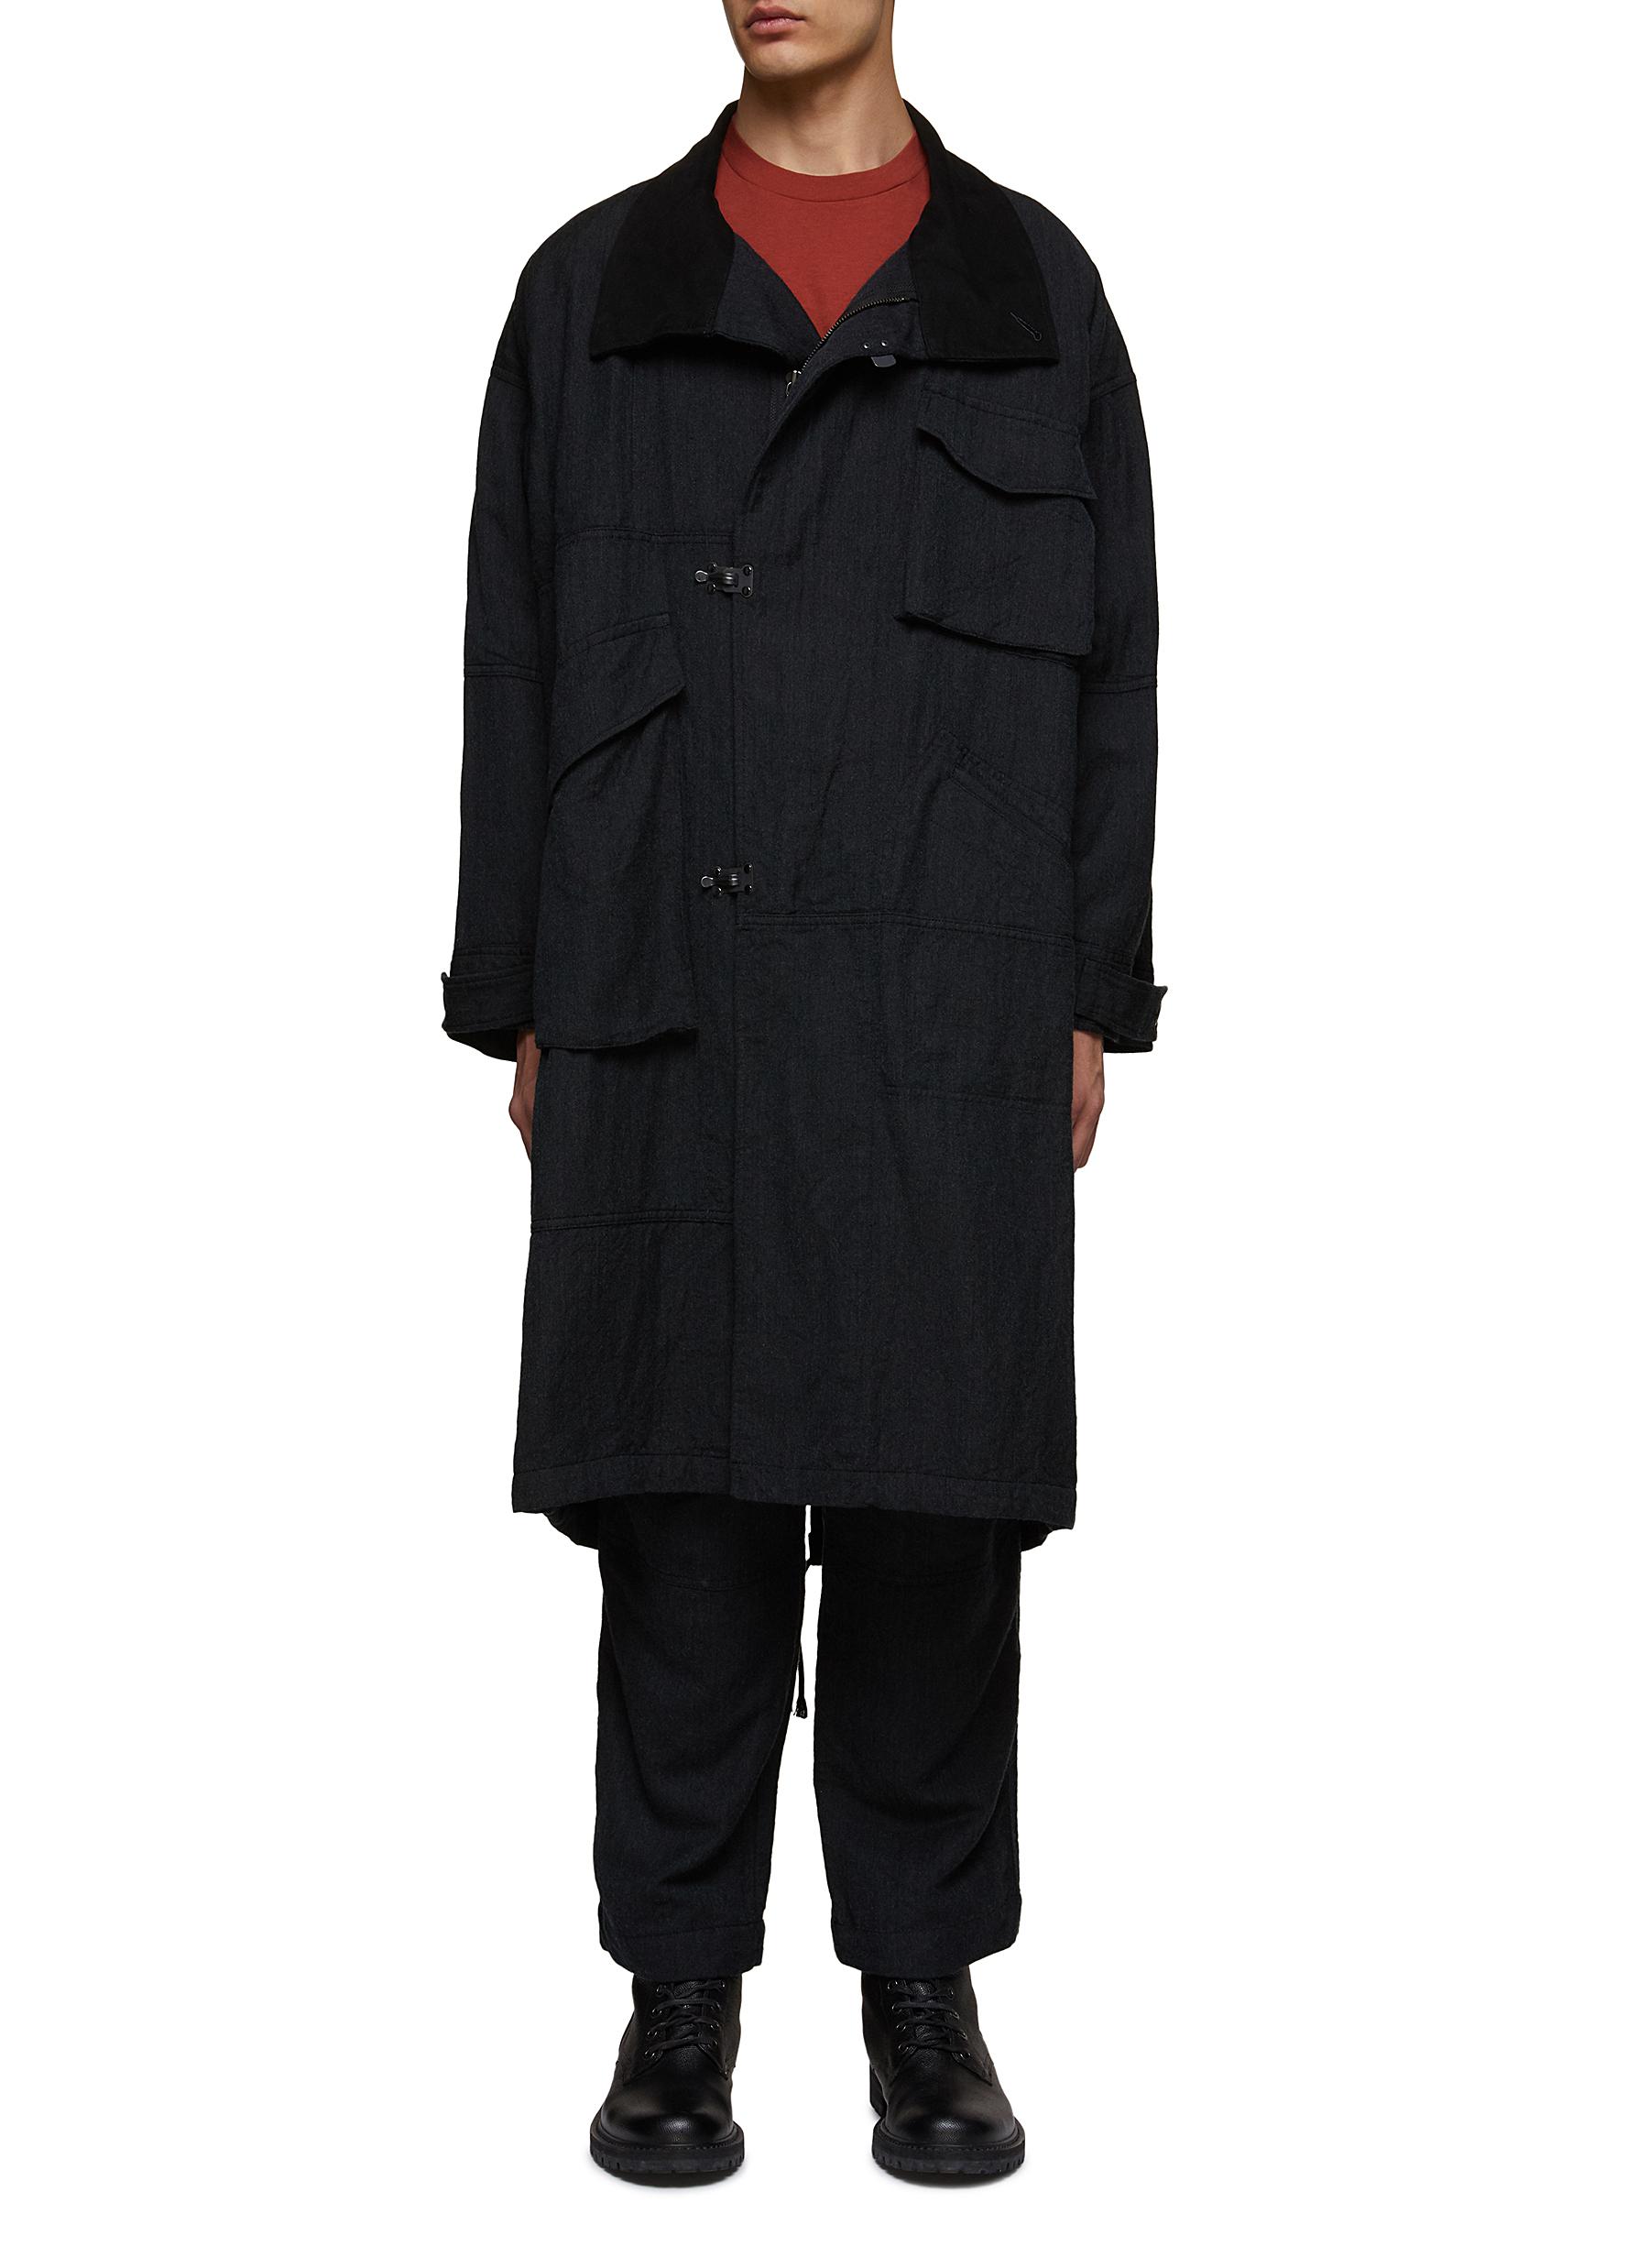 THE VIRIDI-ANNE SINGLE BREASTED STAND COLLAR WOOL LINEN TWILL PARKA